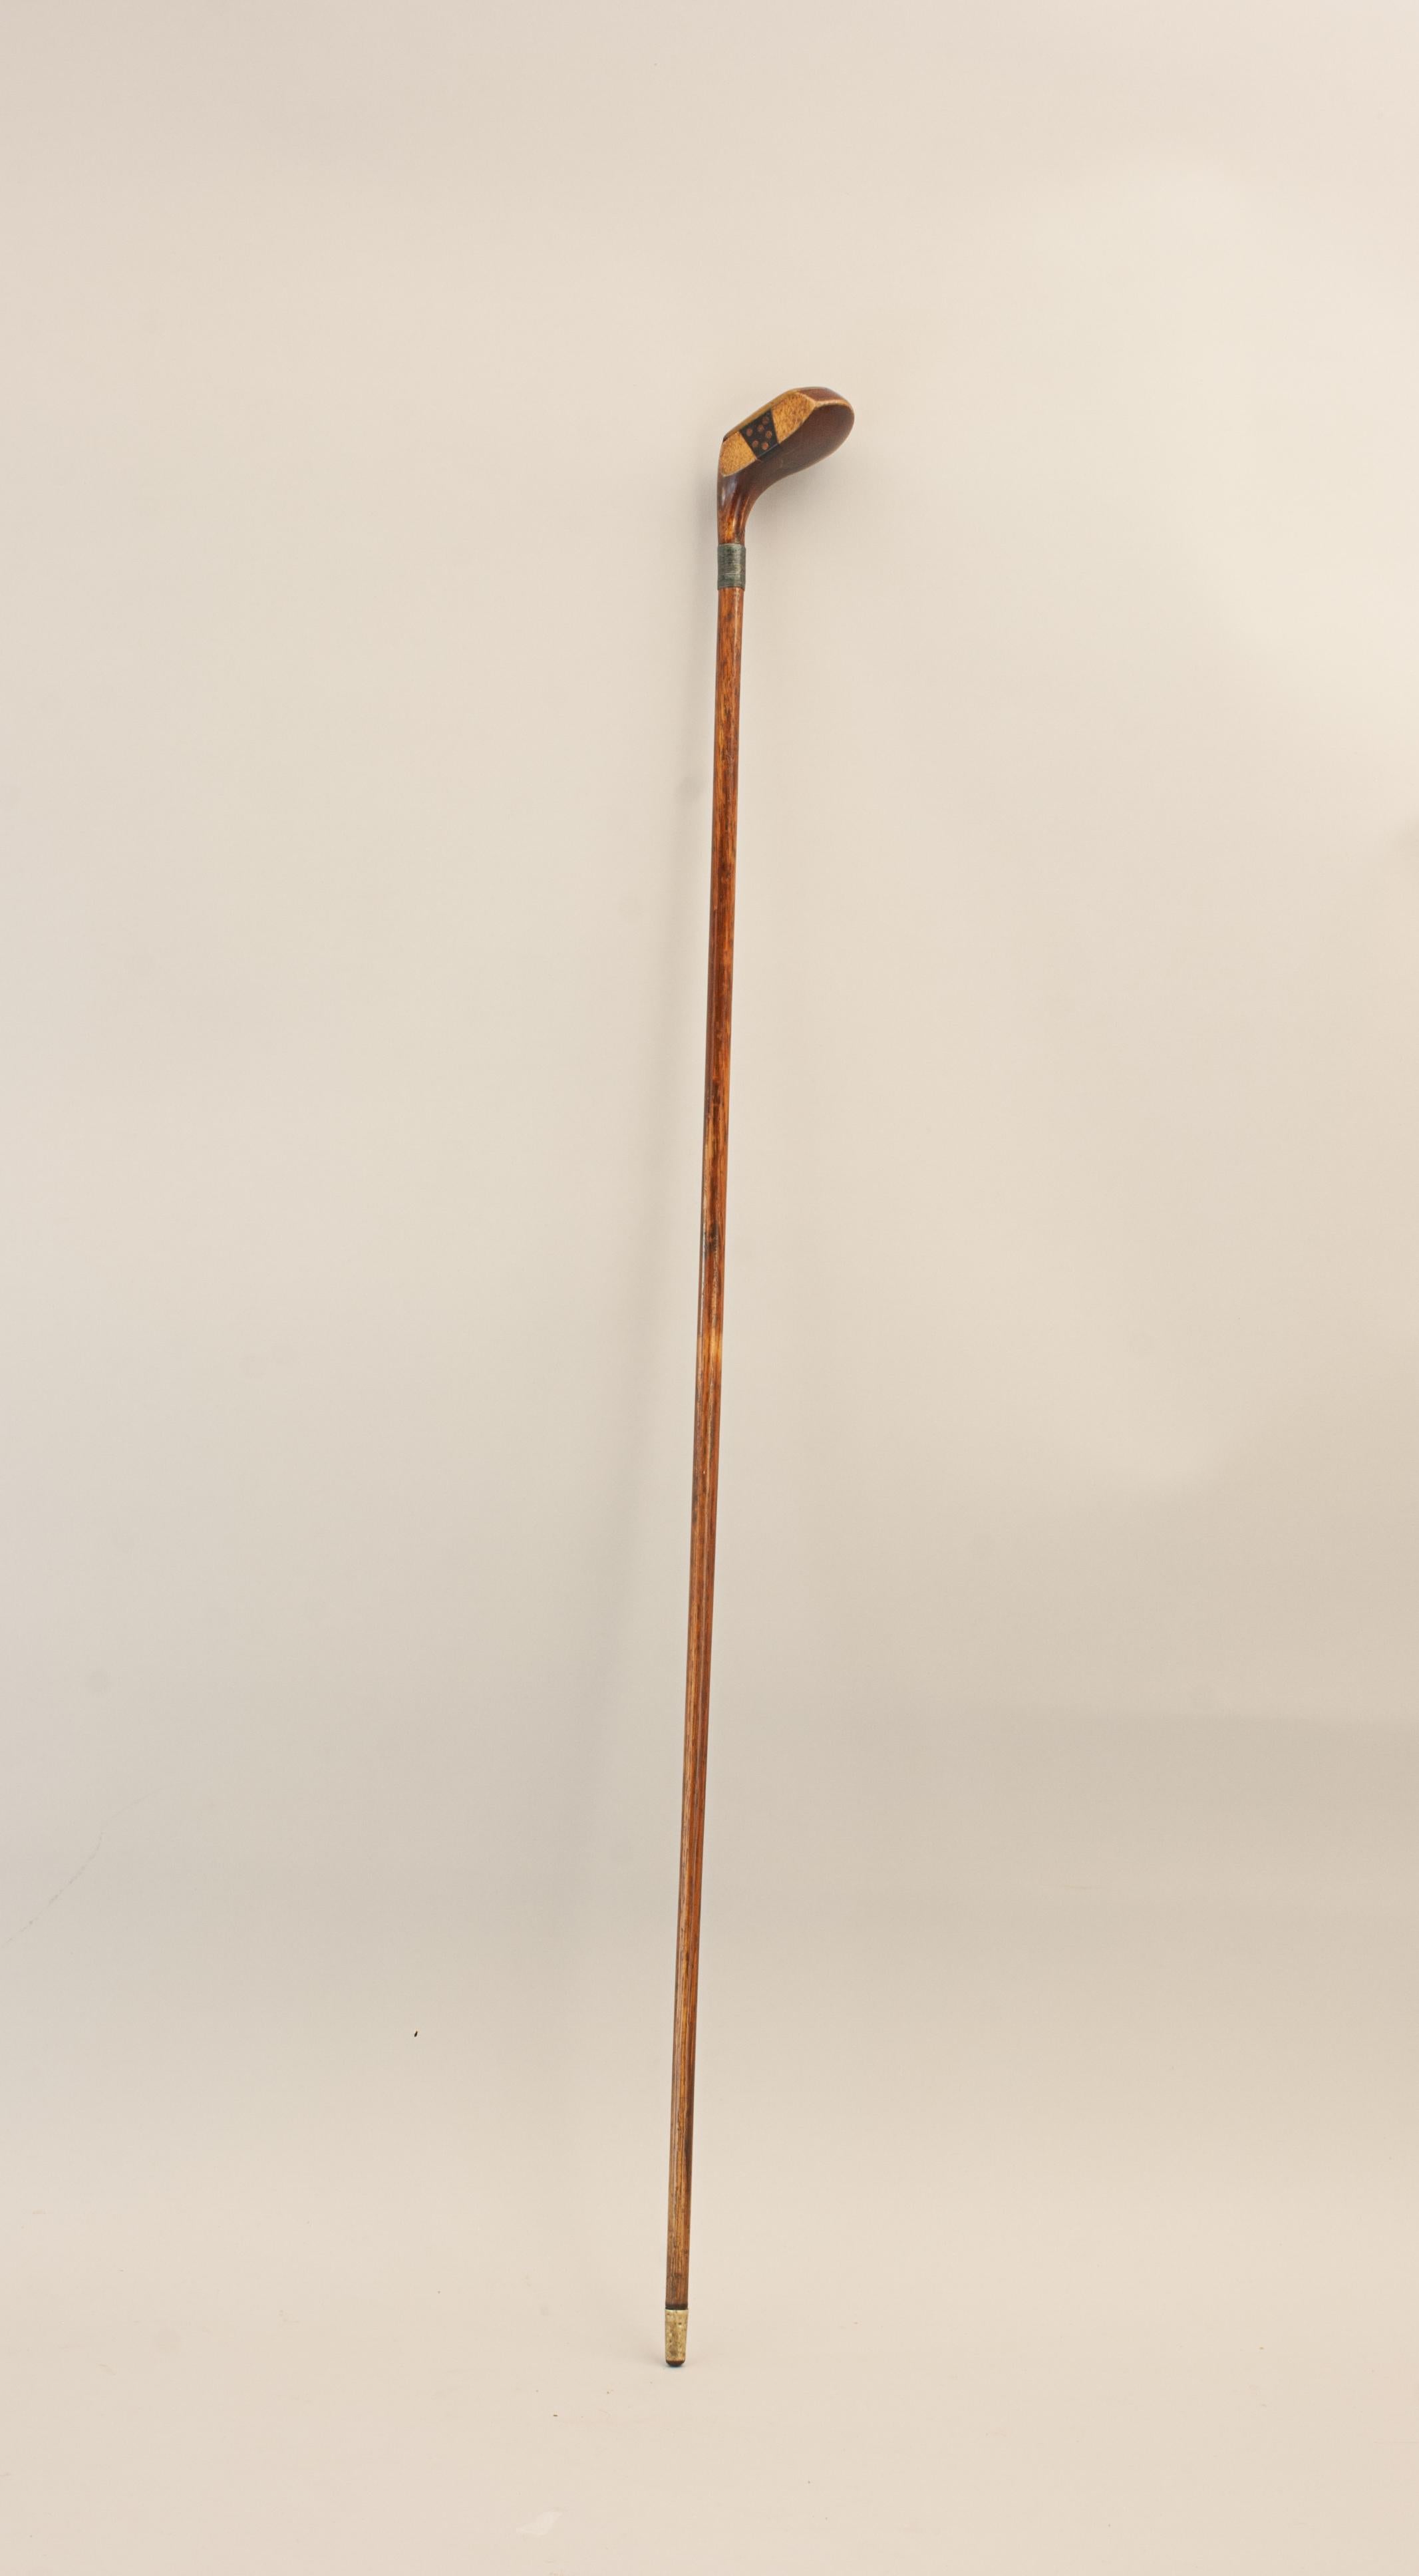 Antique Sunday Club, Golf Club walking stick.
A desirable walking cane with the handle in the shape of a golf club head. The gentleman's walking stick has a persimmon socket head handle with a pegged horn insert, face insert and a lead weight to